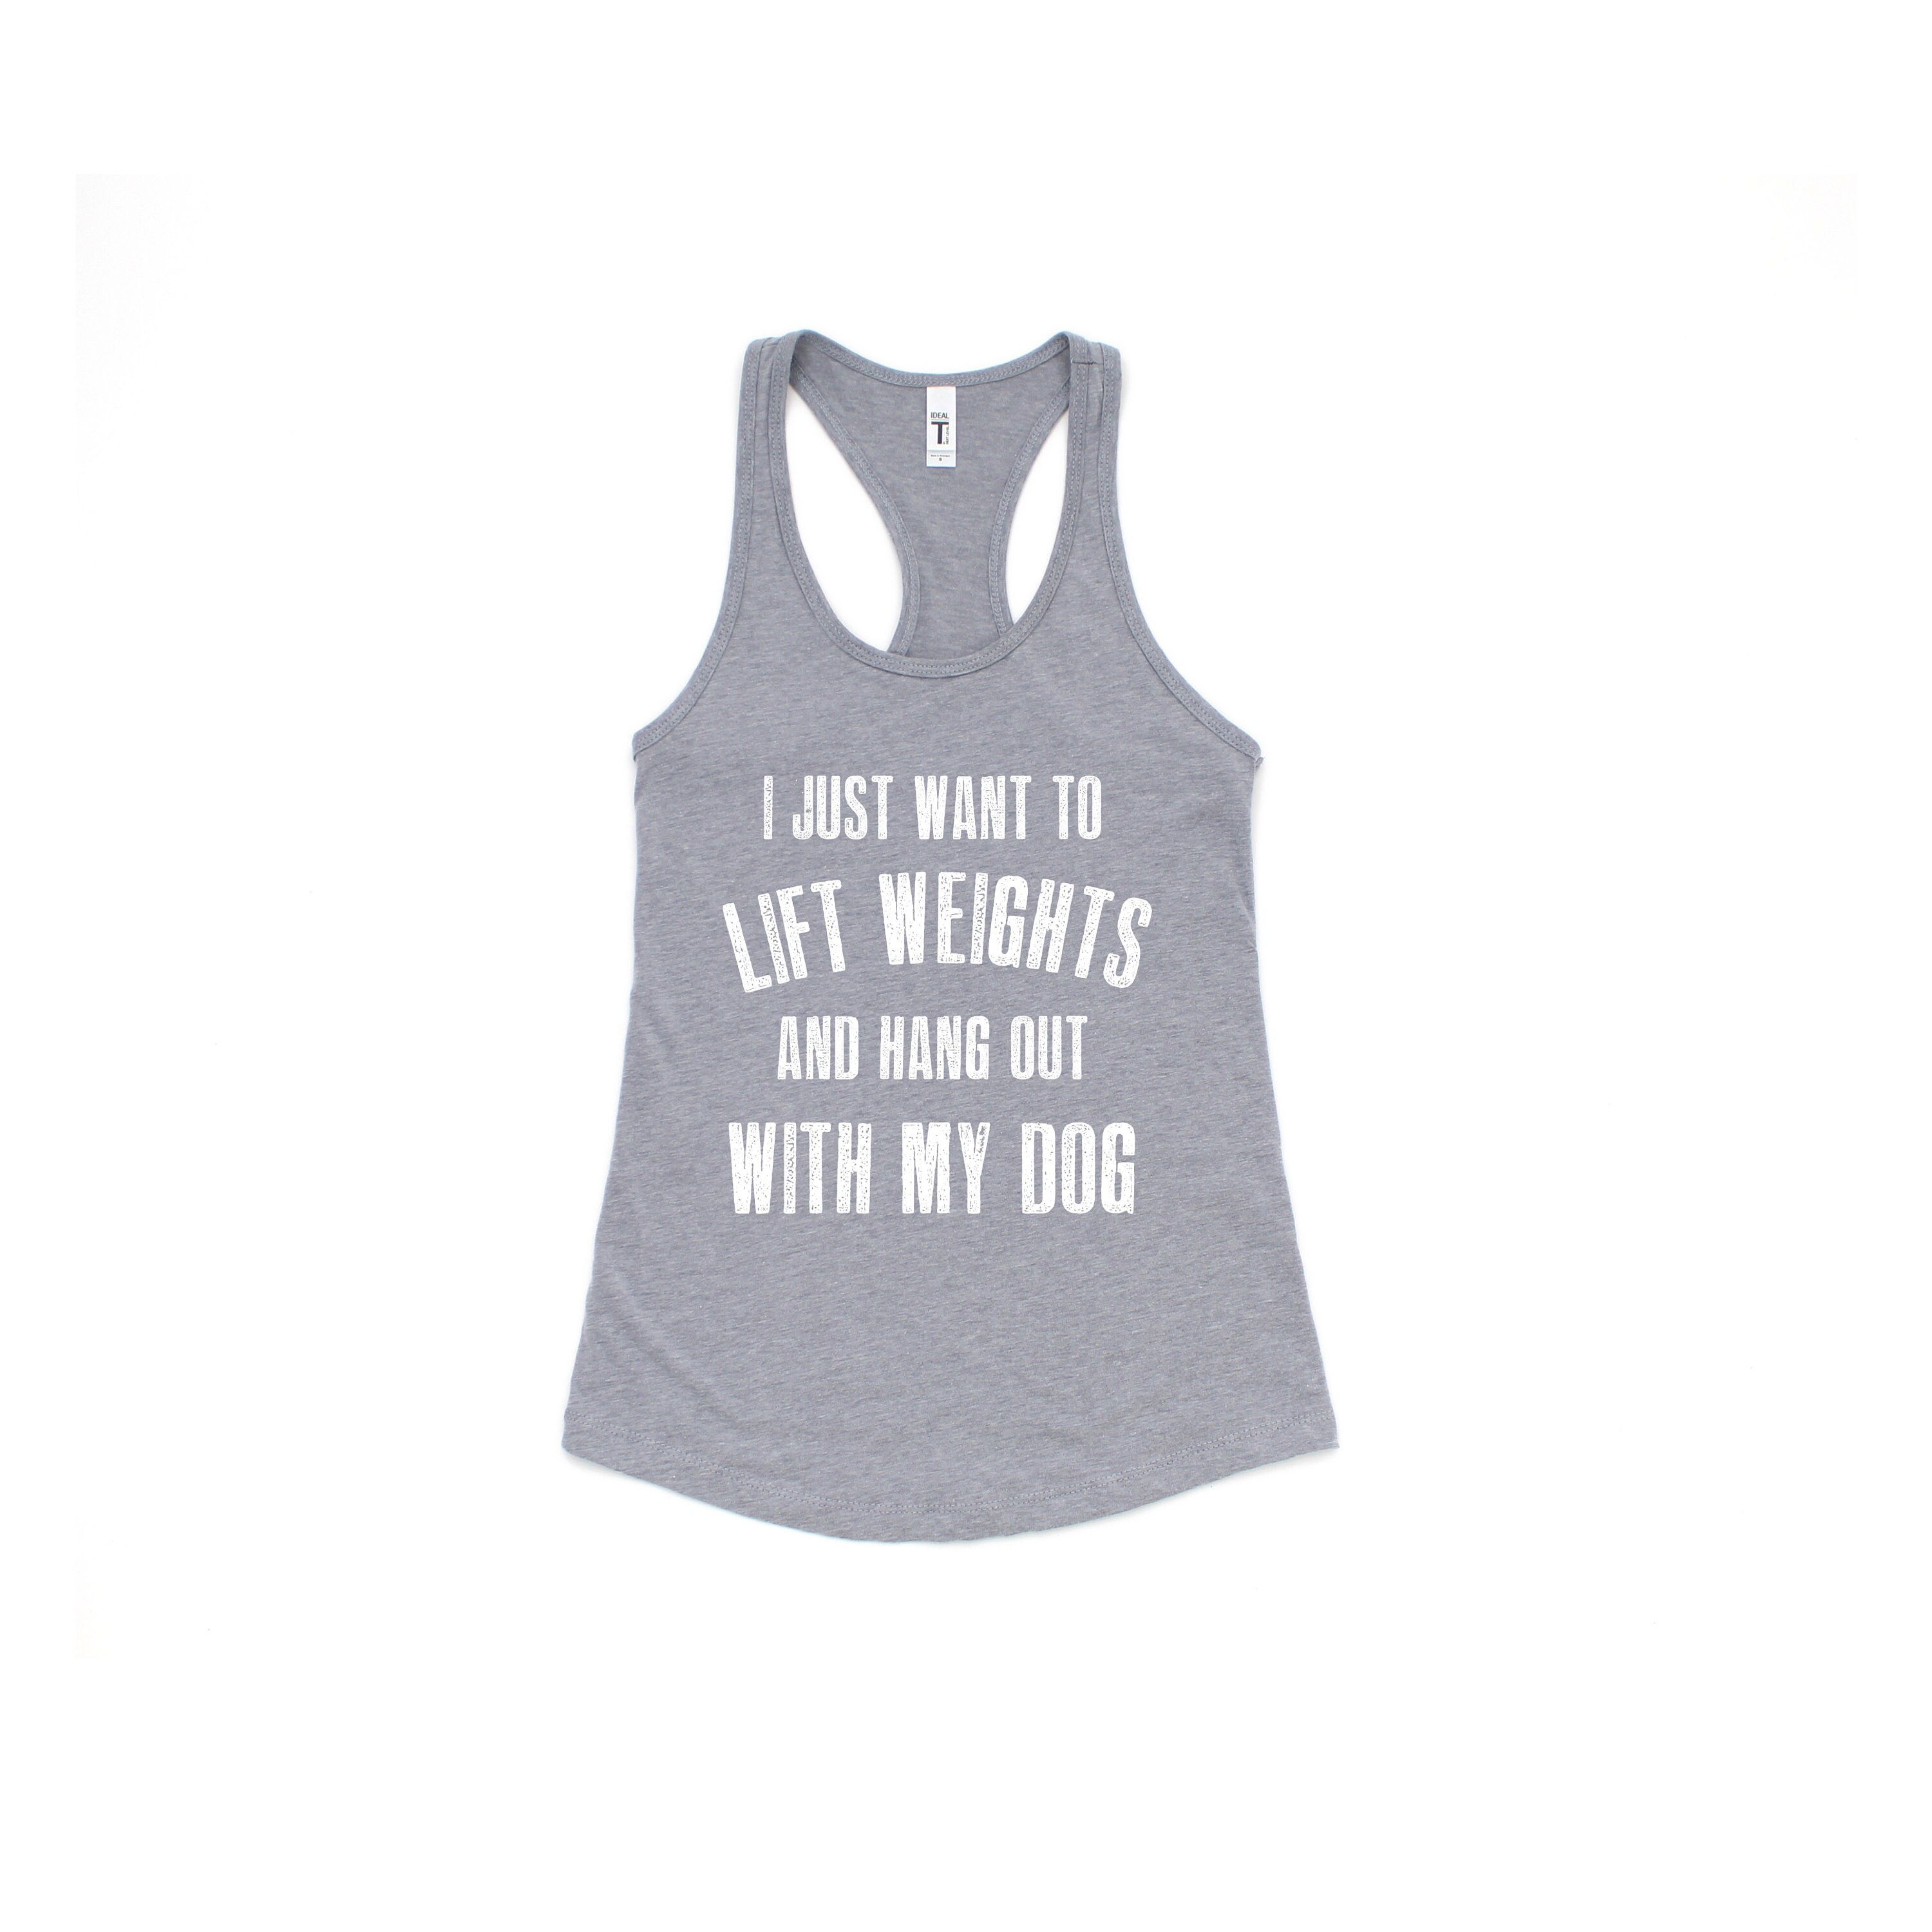 Weights and Dog Tank Workout Tanks for Women Cute Workout - Etsy